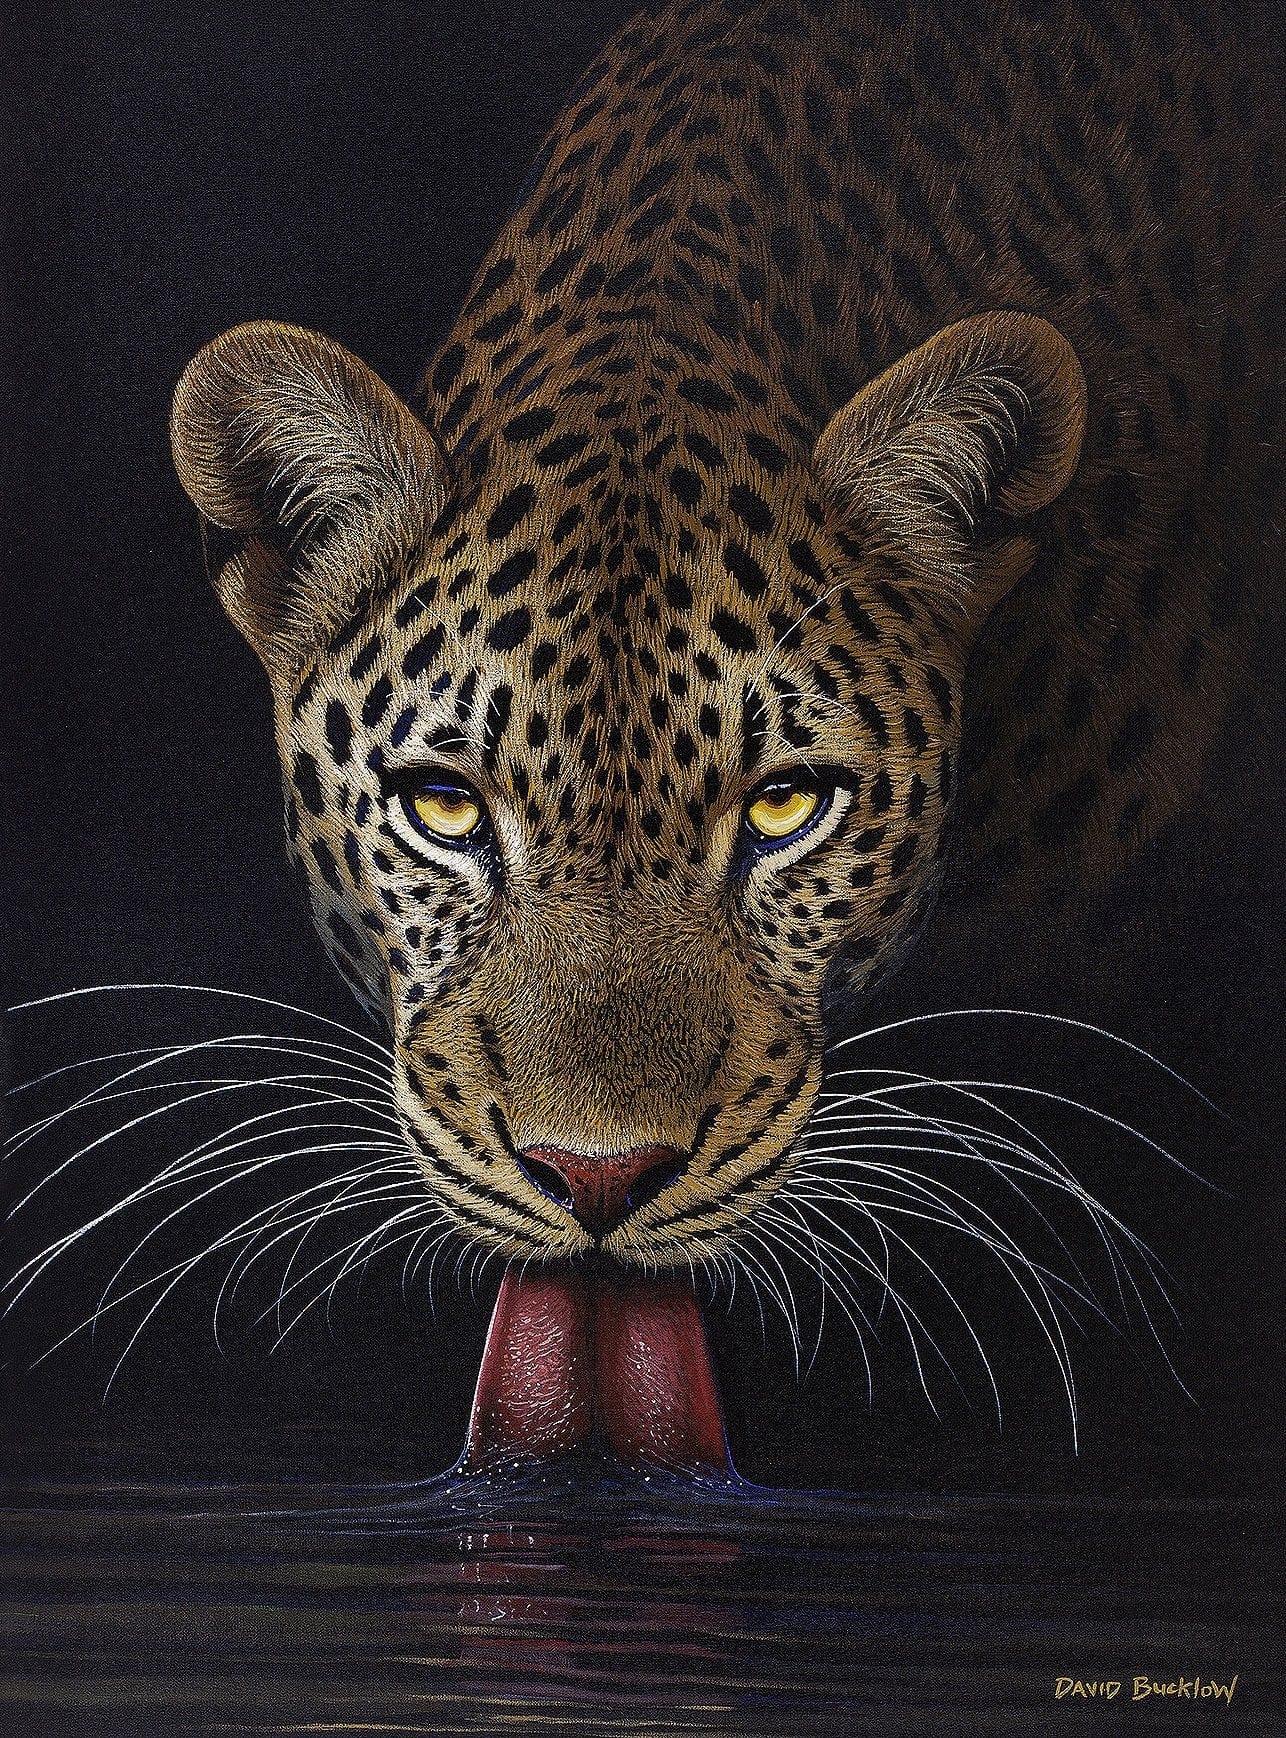 South African Limited Editions by David Bucklow - Moonlight Drink - Leopard at Night - Fine Art Portfolio